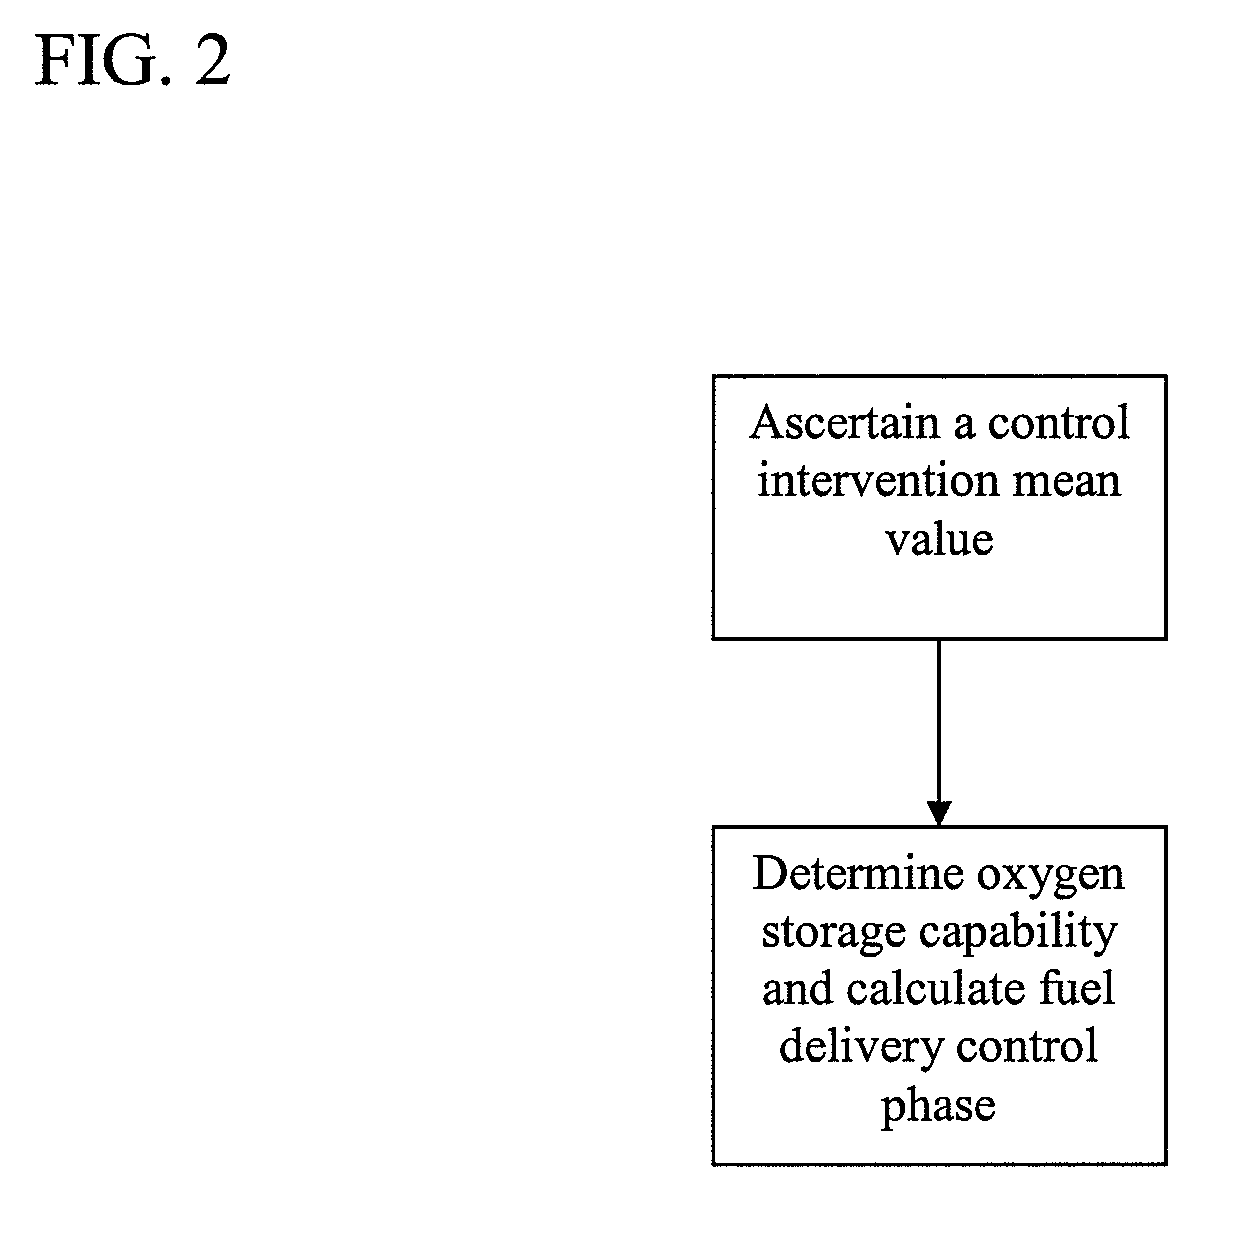 Procedure to measure the oxygen storage capability of an emission control system